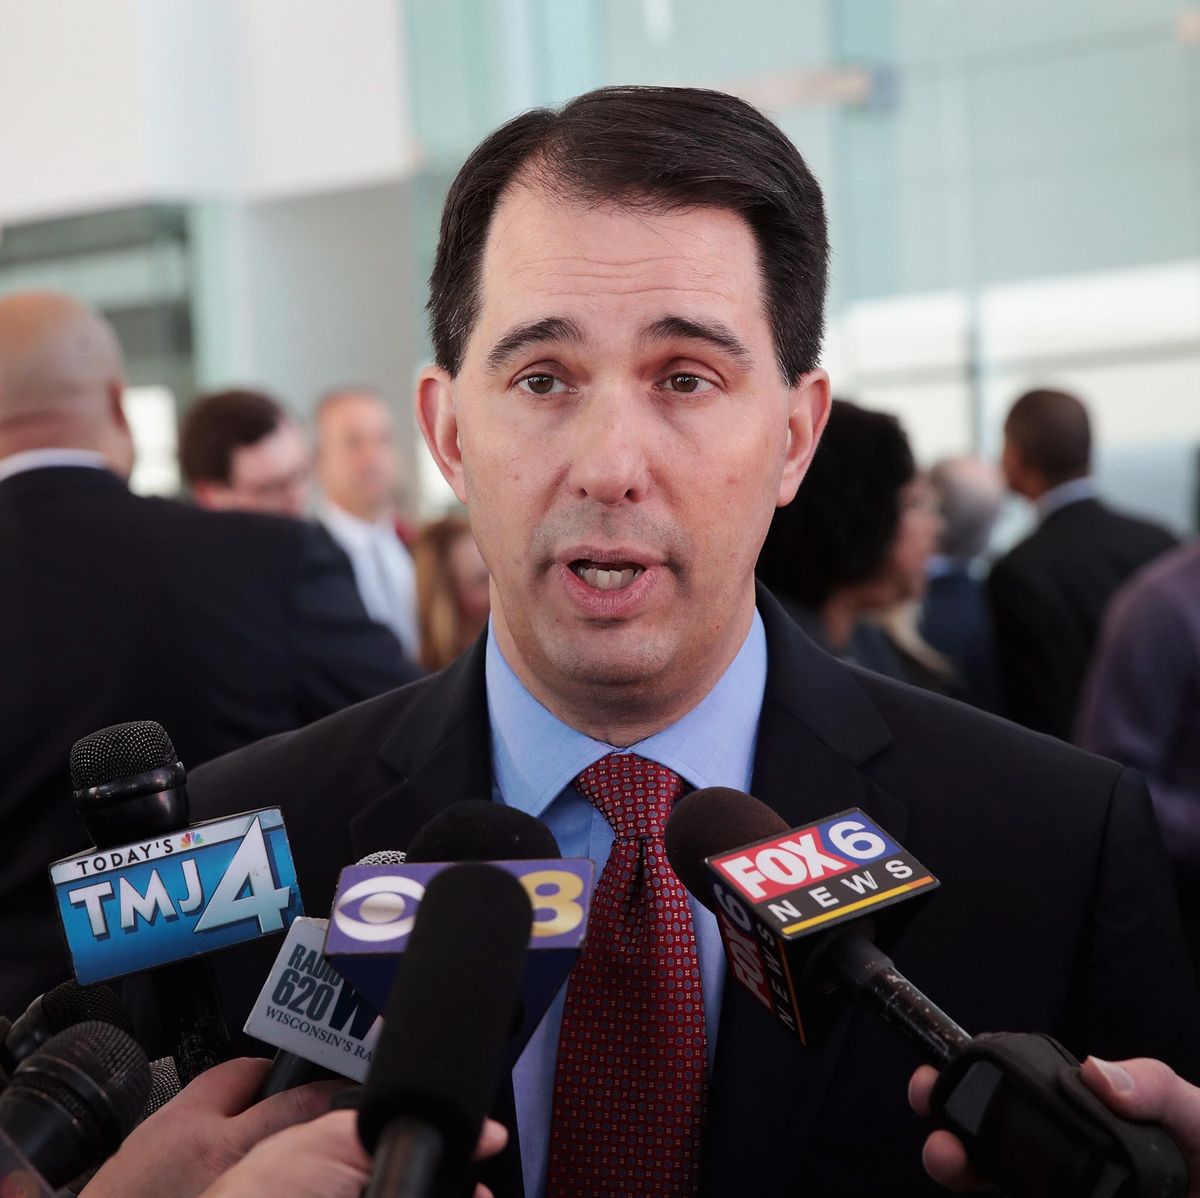 Wisconsin Governor Scott Walker Attends Foxconn's Announcement Of Milwaukee Investment